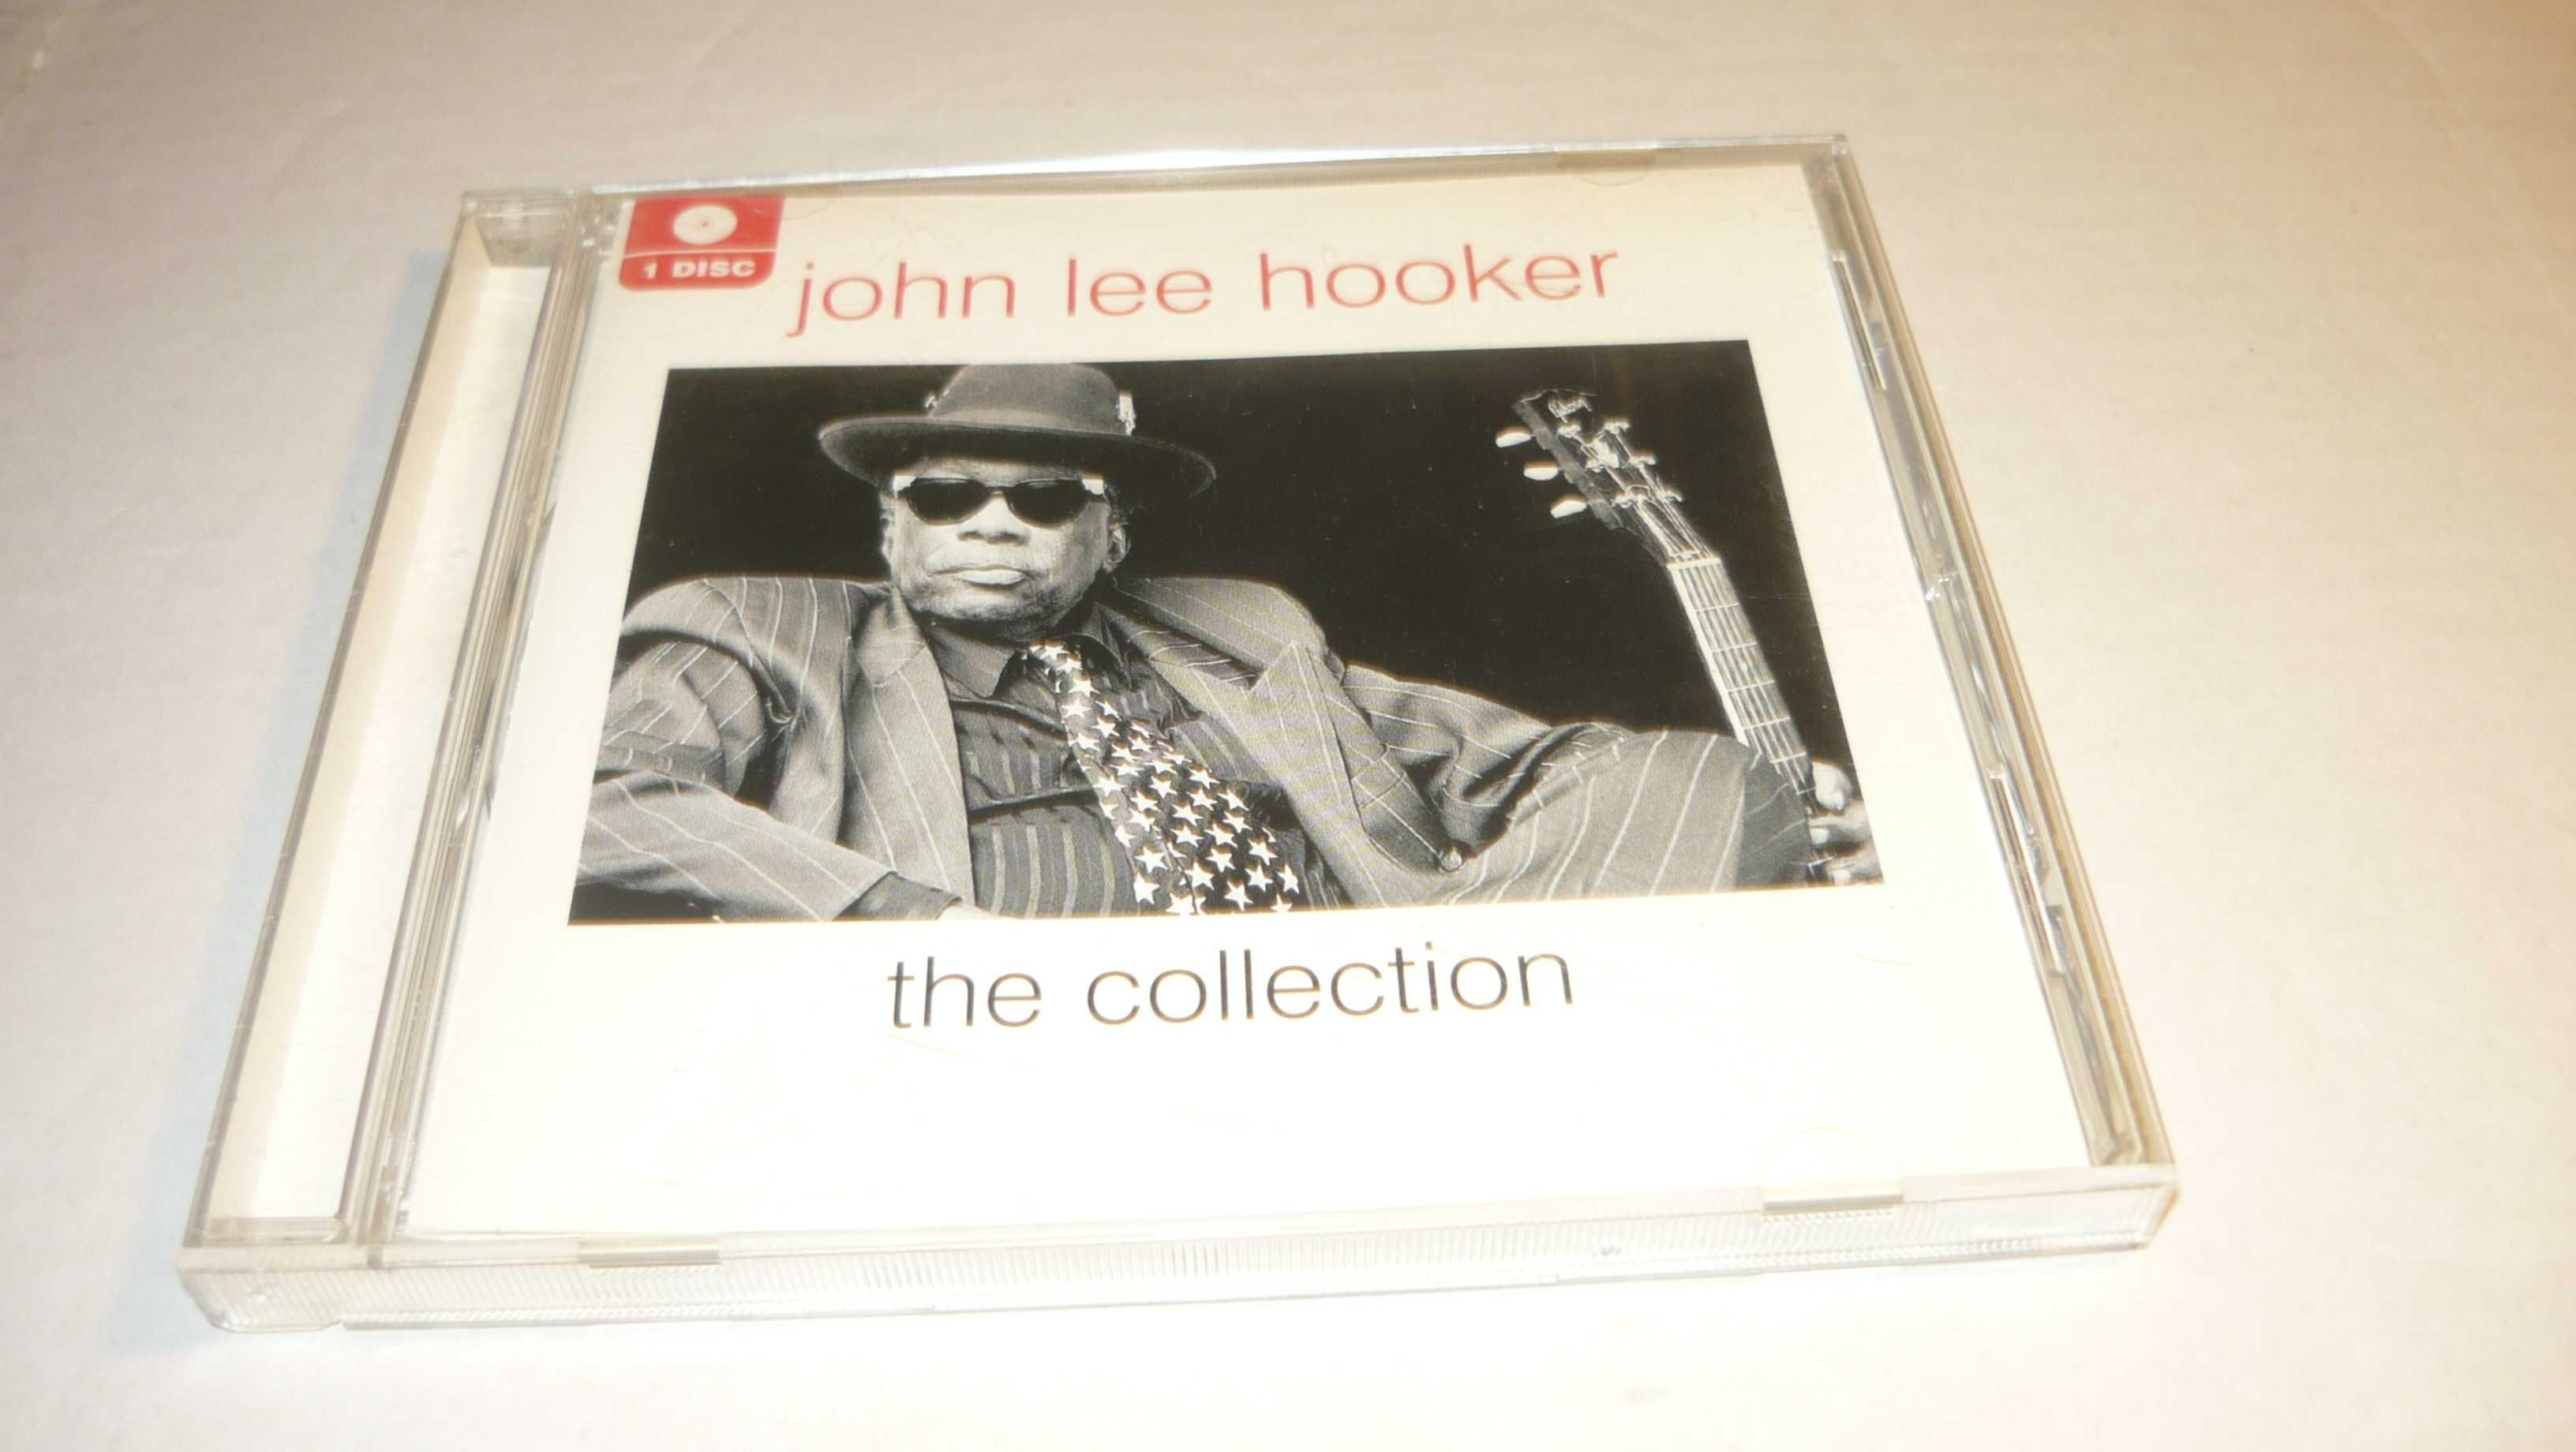 John Lee Hooker the collection CD